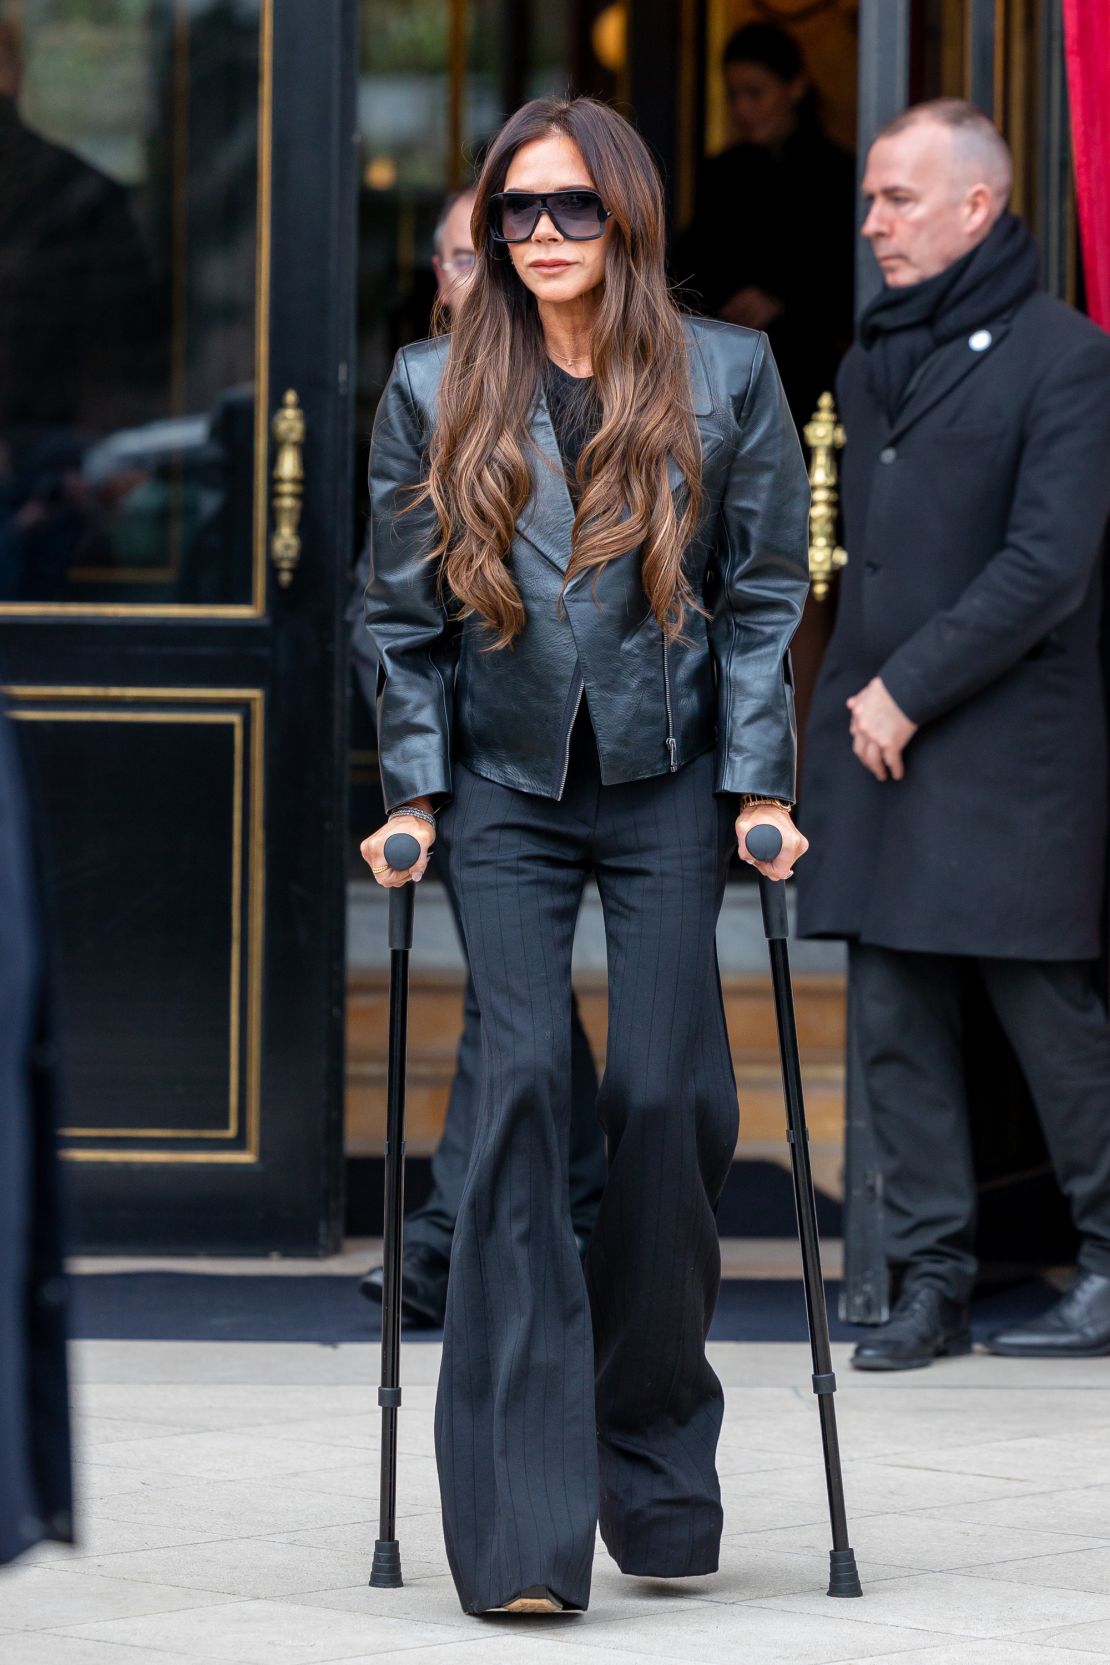 And even with a serious foot injury, Victoria will still deliver a sleek, tailored look — only now her outfits are completed with an all-black customizable walking aid, from UK brand "Cool Crutches."